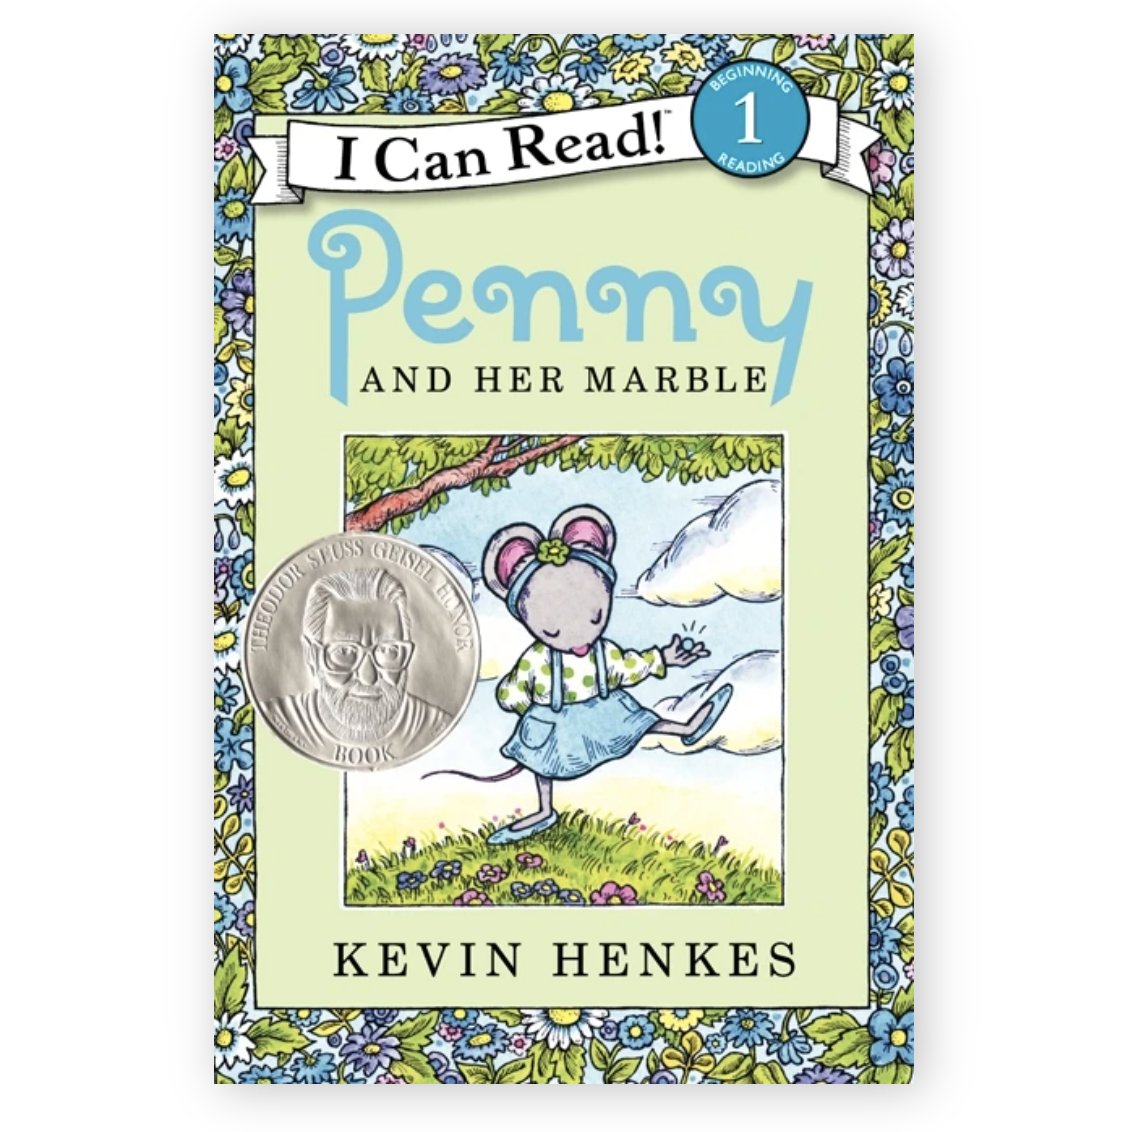 harper-collins-i-can-read-level-1-penny-and-her-marble-little-giant-kidz